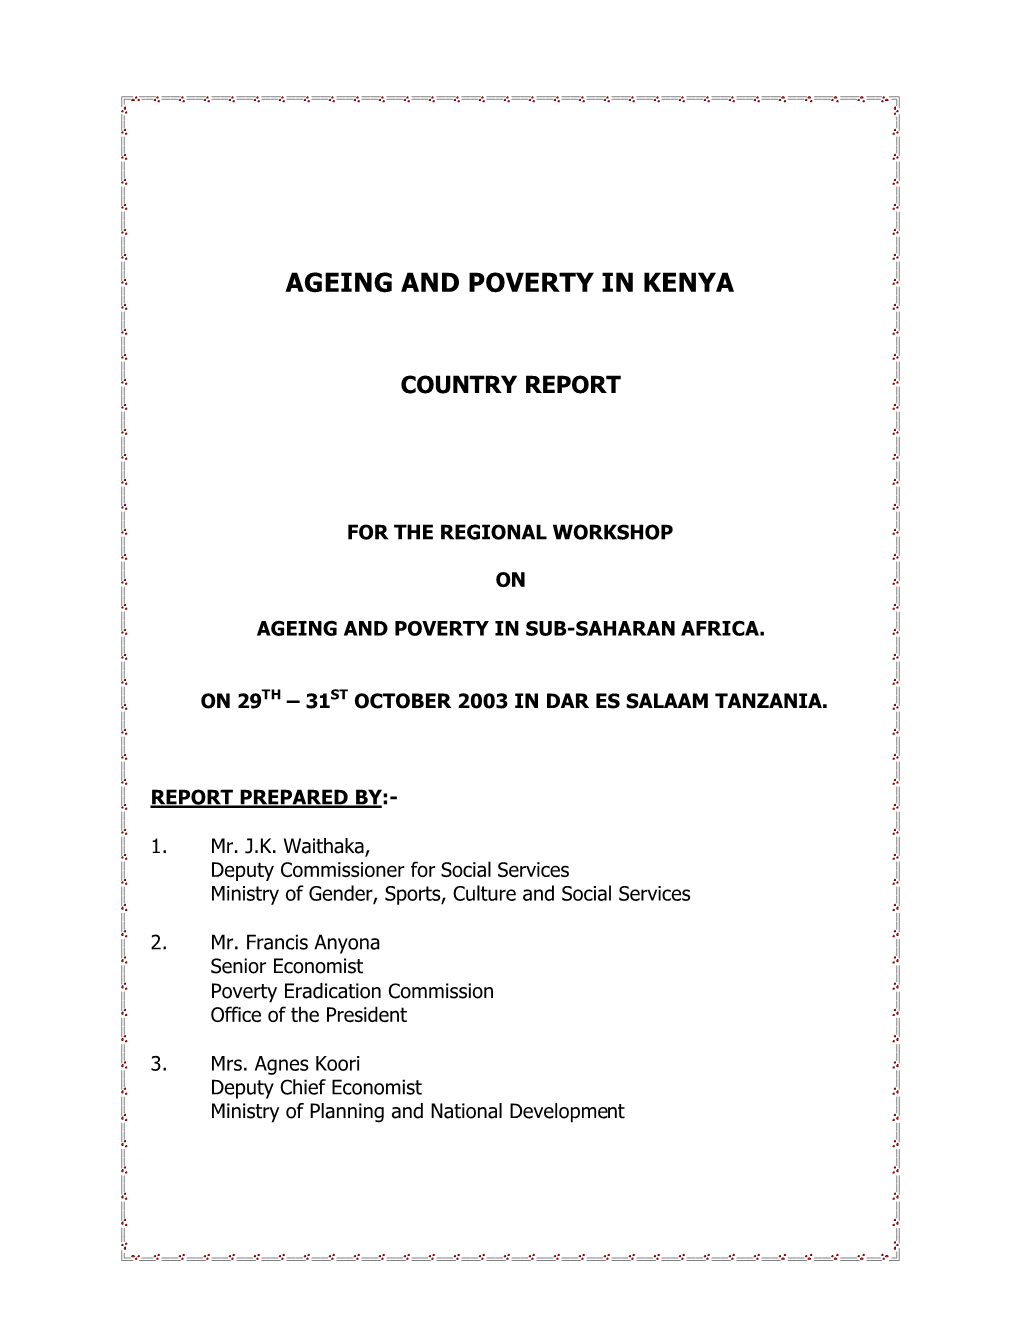 Ageing and Poverty in Kenya